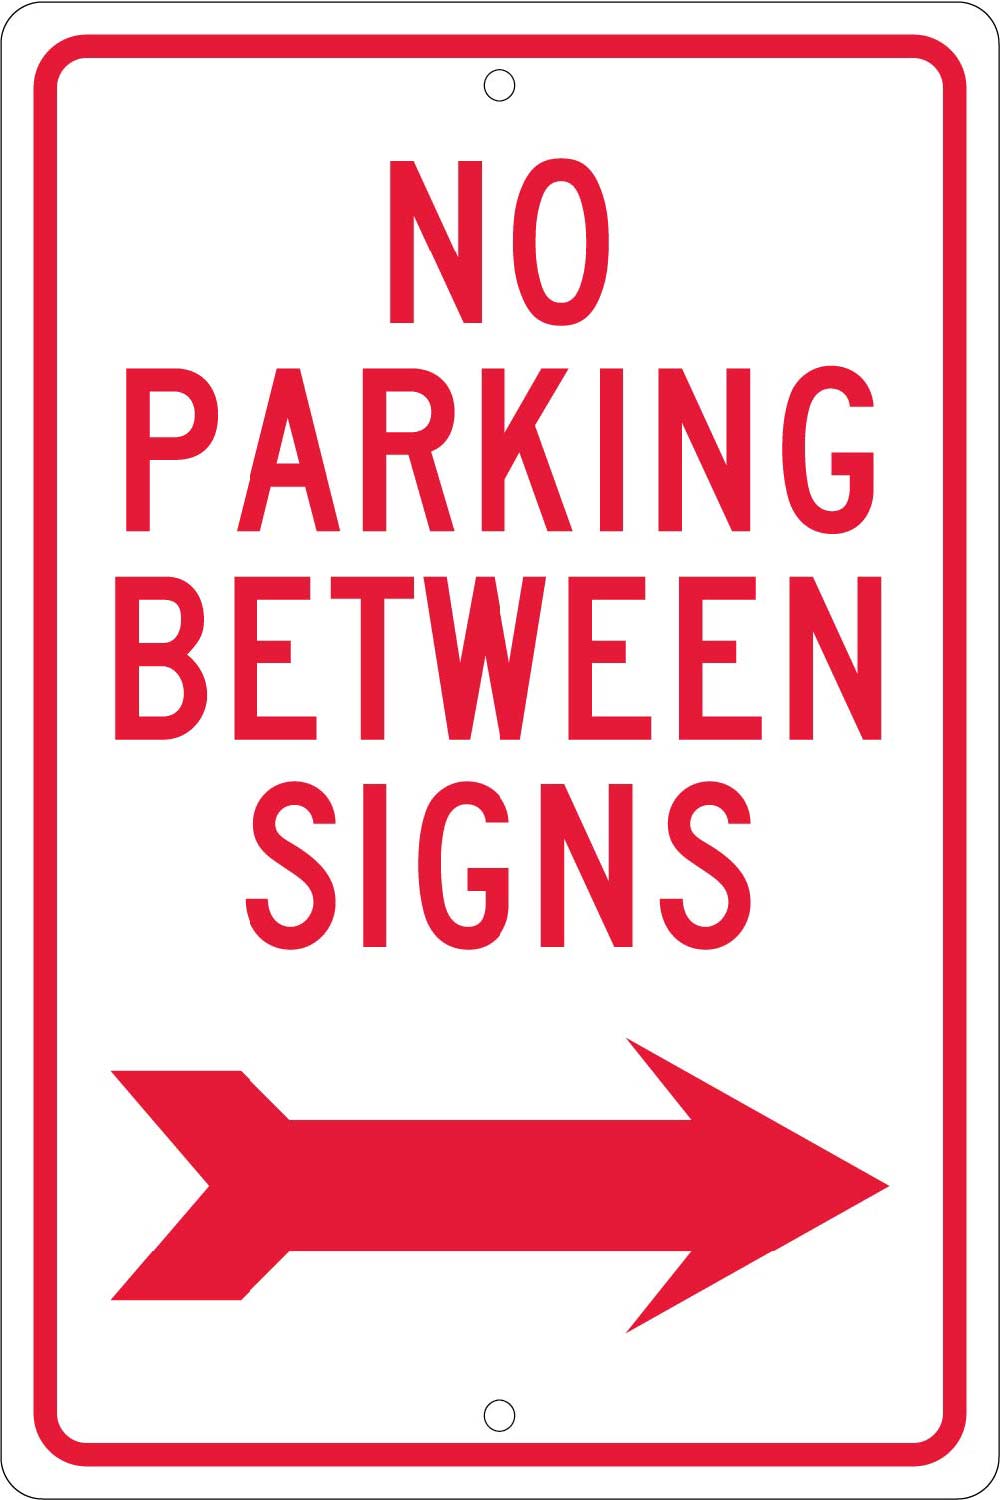 No Parking Between Signs Sign-eSafety Supplies, Inc